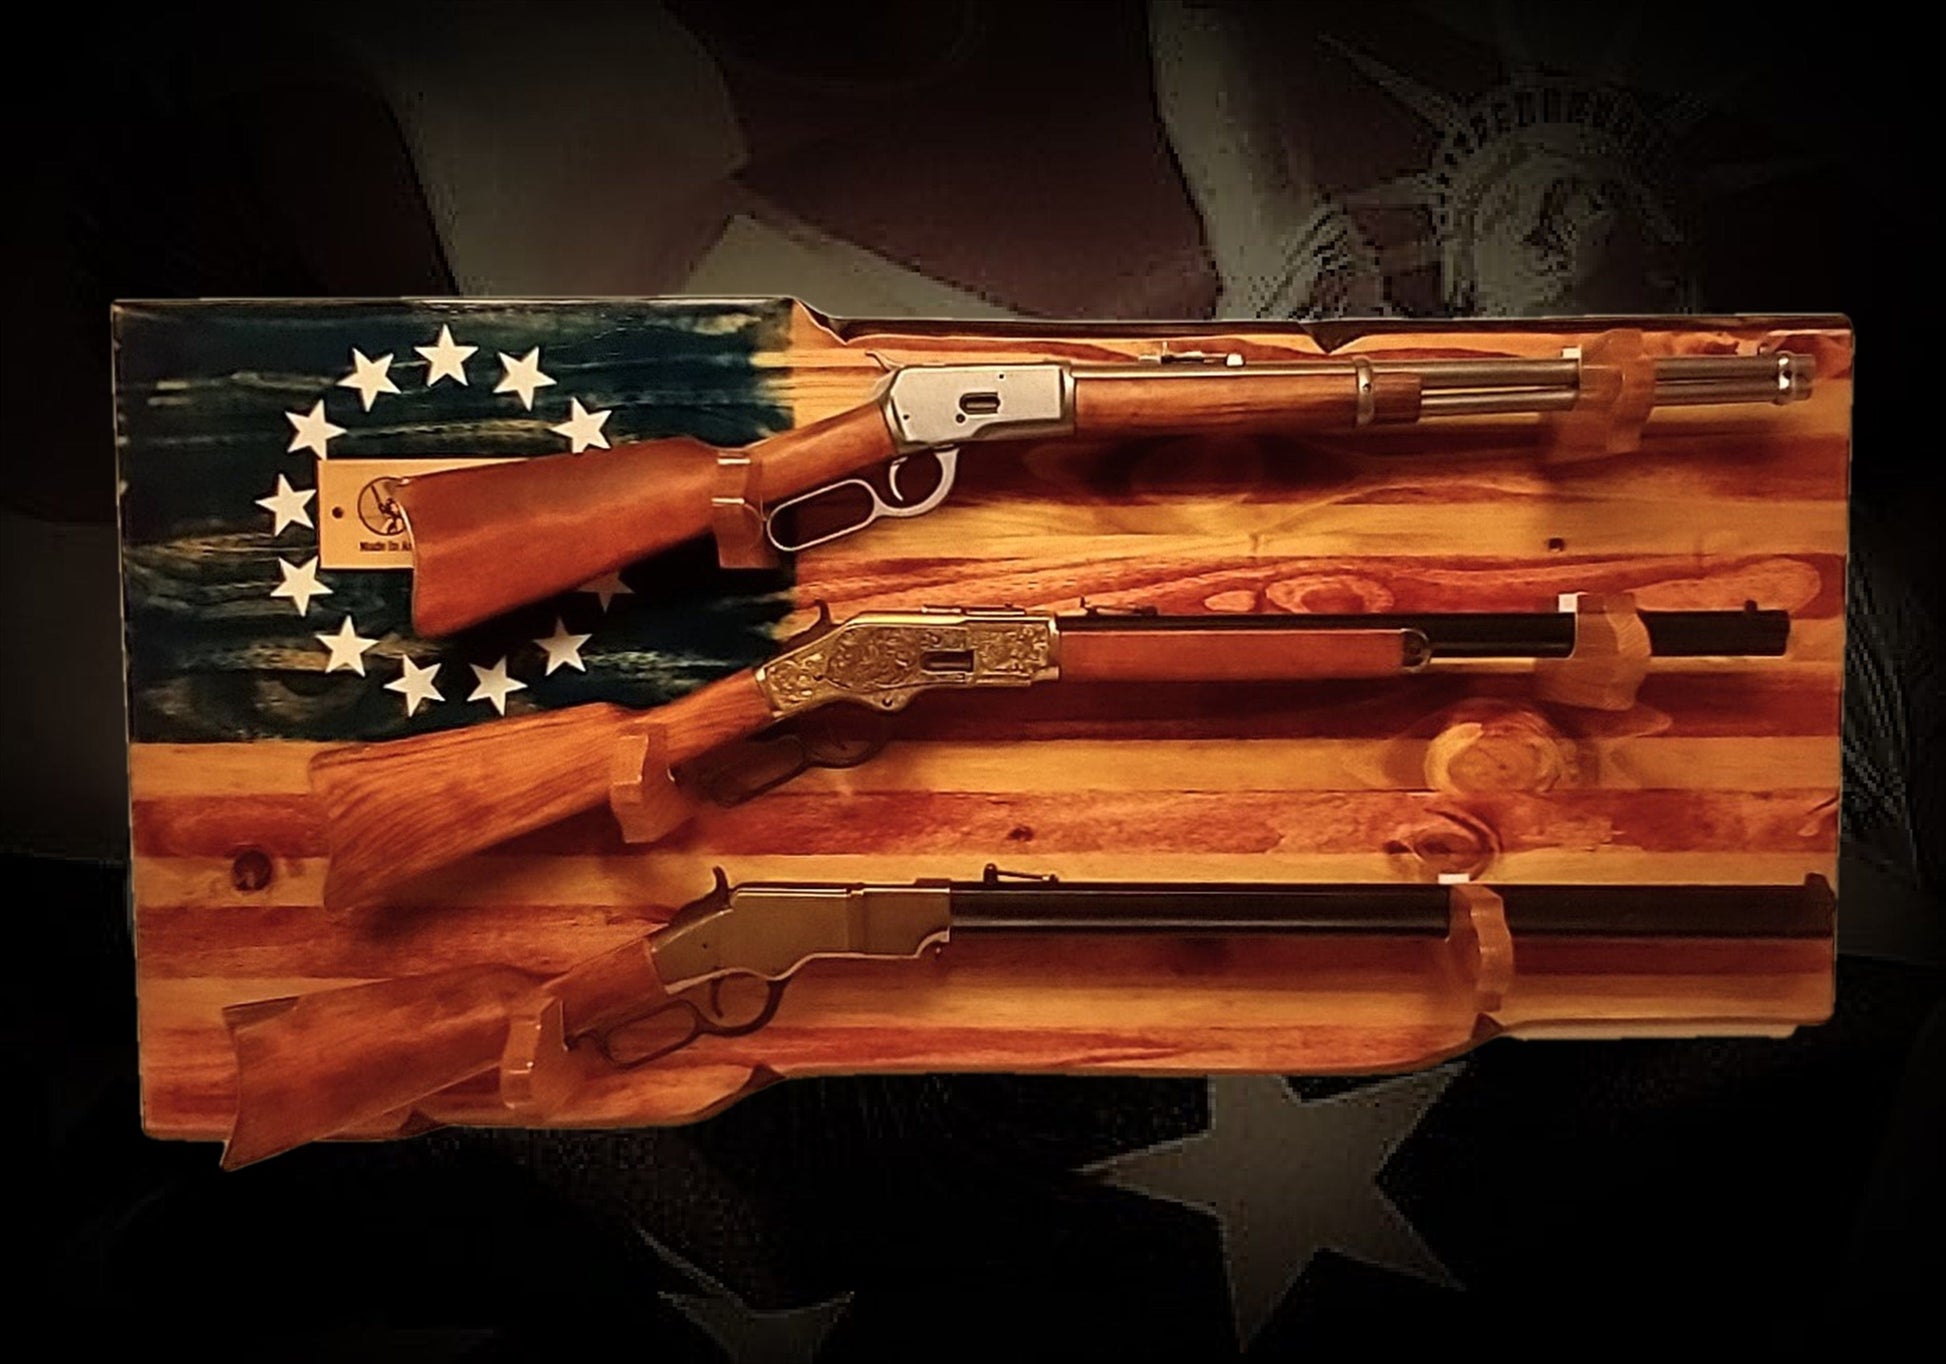 walkerwoodgifts Home & Garden Rustic Henry 13 Stars and Stripes Display 3 Place Lever Action Rifles Wood Henry Plaque Great Gift!